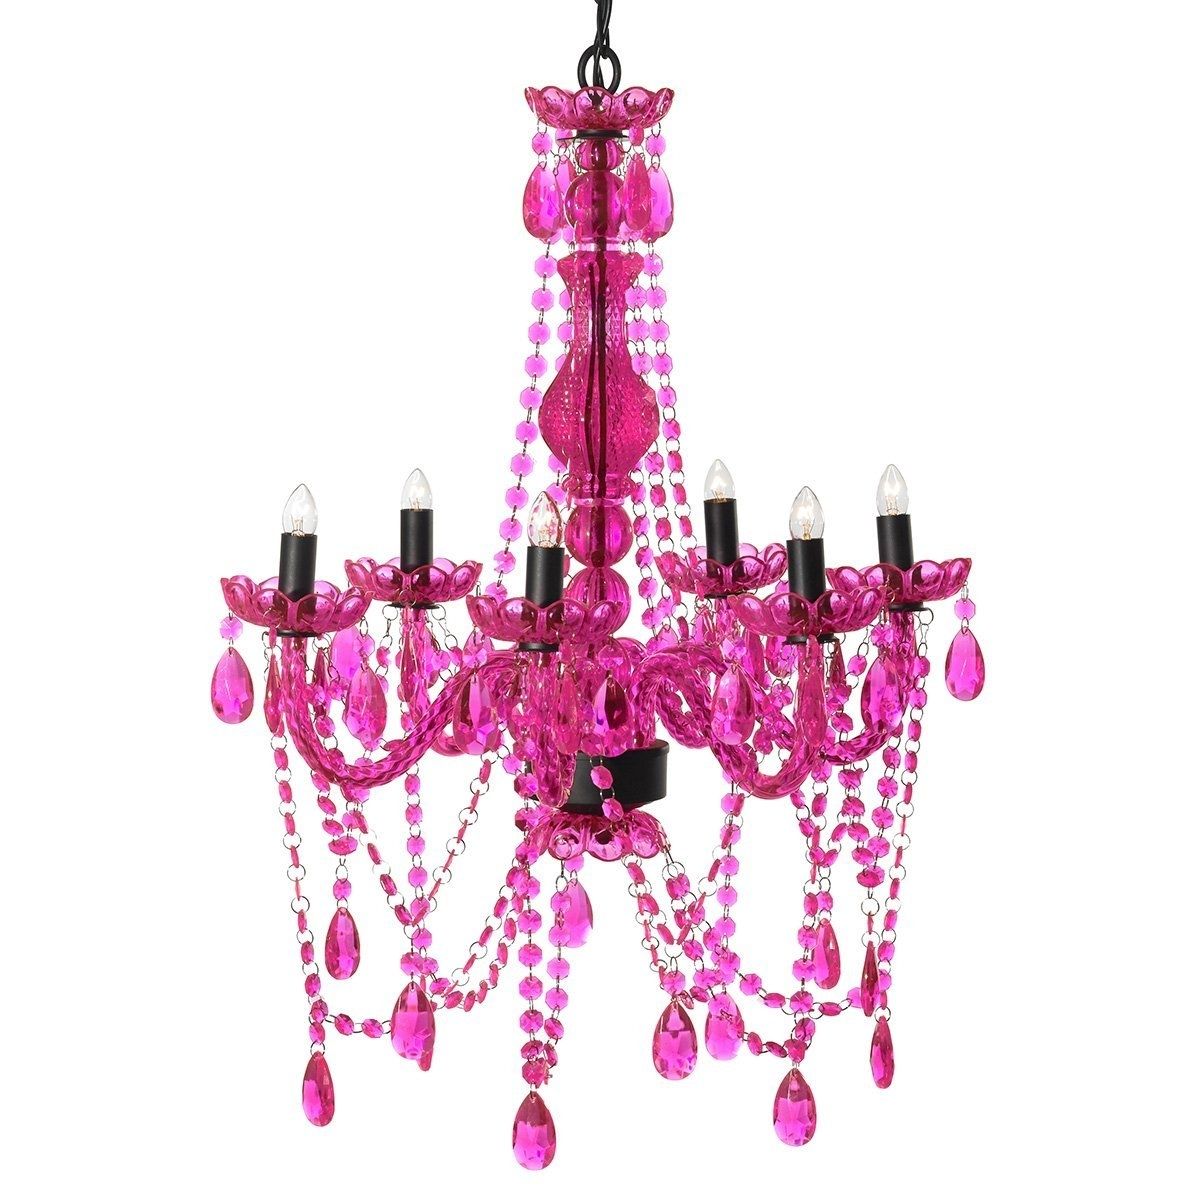 Popular Turquoise And Pink Chandeliers With Amazon: 3c4g Chandelier, Turquoise: Home & Kitchen (Photo 6 of 15)